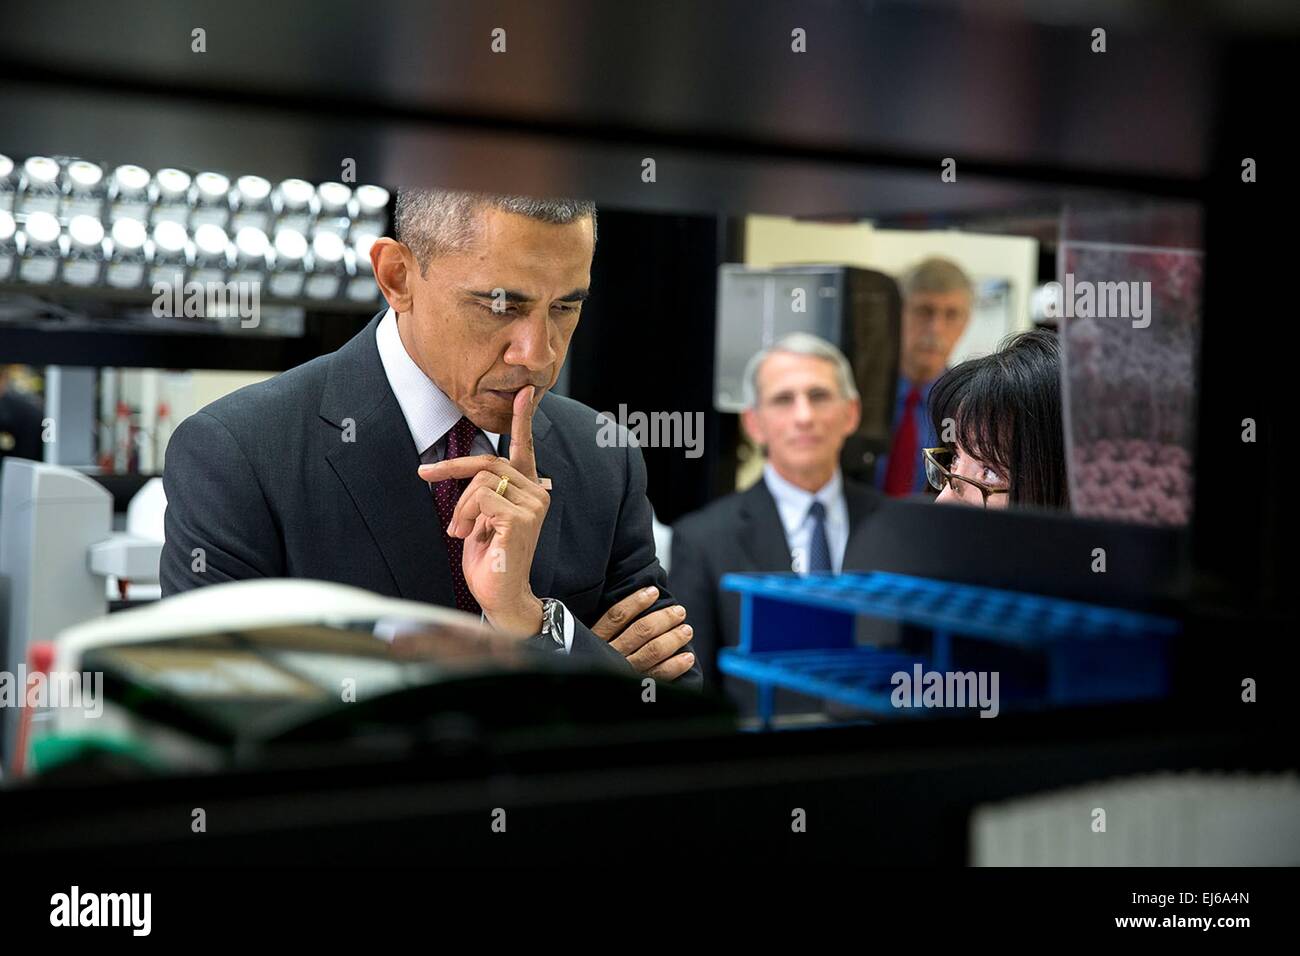 US President Barack Obama listens to Dr. Nancy Sullivan, Senior Investigator, Chief Biodefense Research Section, explain the investigational Ebola vaccine candidate currently being tested on humans during a lab tour at the Vaccine Research Center at the National Institutes of Health December 2, 2014 in Bethesda, Maryland. Dr. Anthony Fauci, Director, National Institute of Allergy and Infectious Diseases and Dr. Francis Collins, Director, NIH watch in the background. Stock Photo